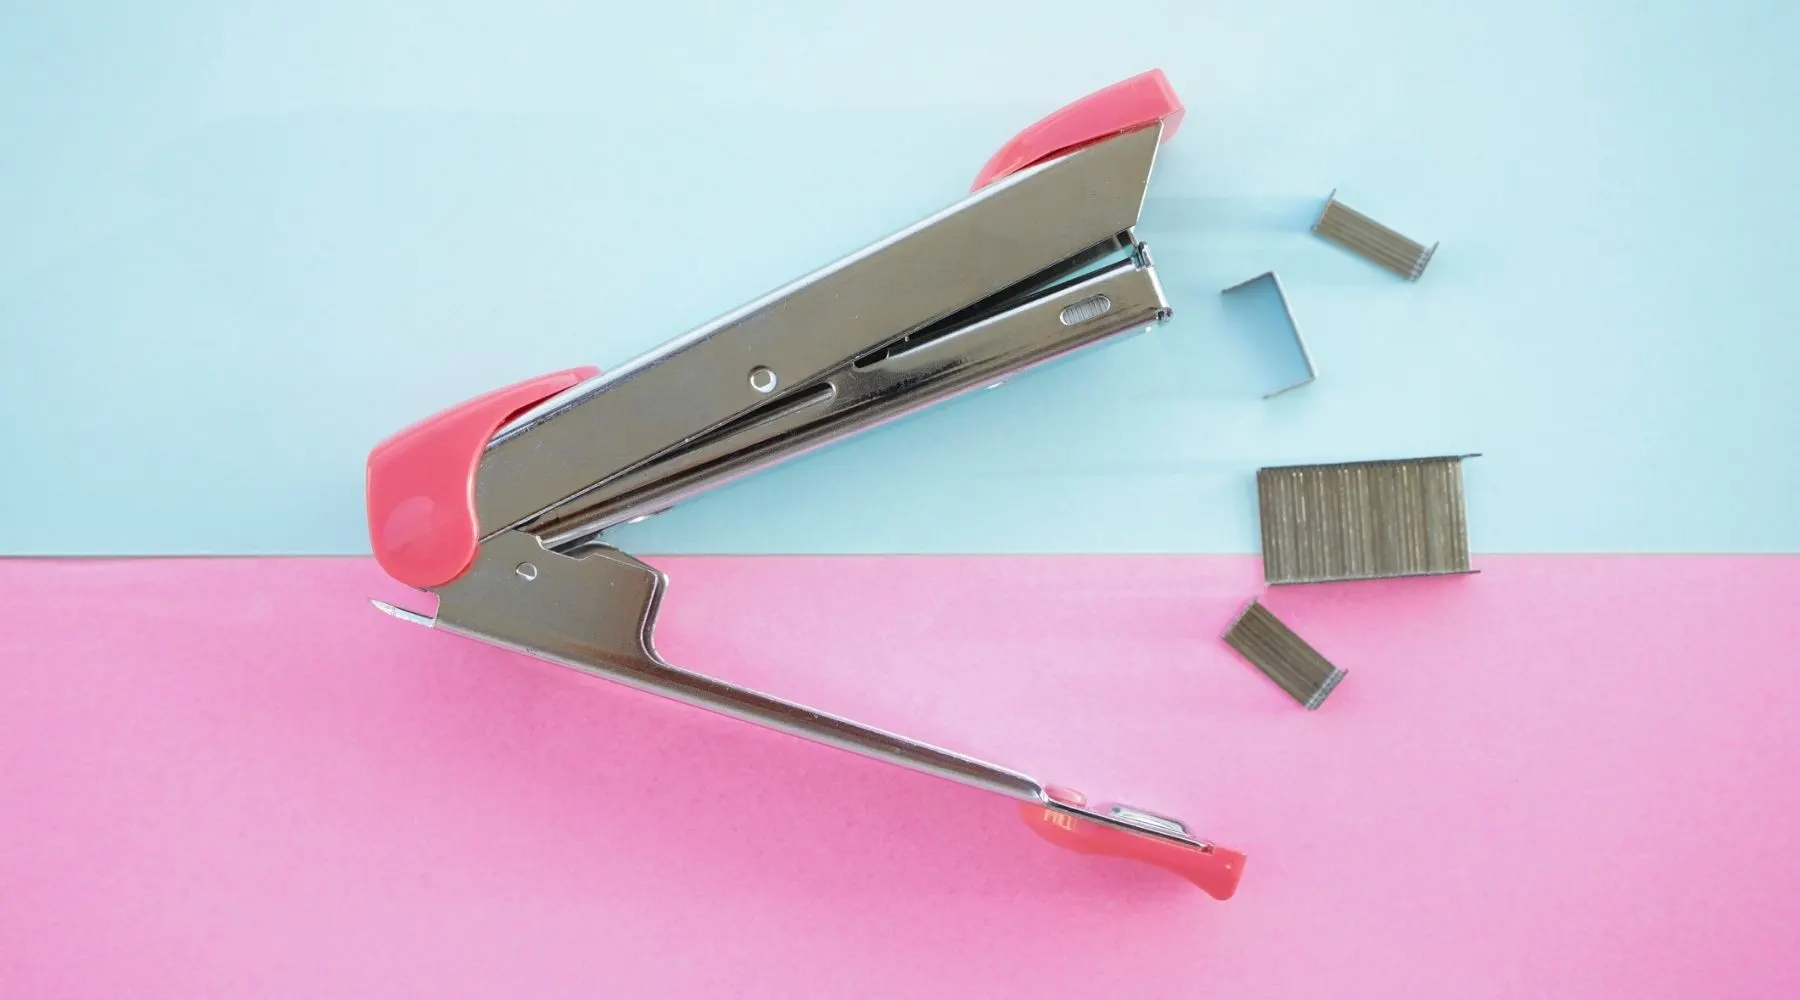 A stapler on a blue and pink background.